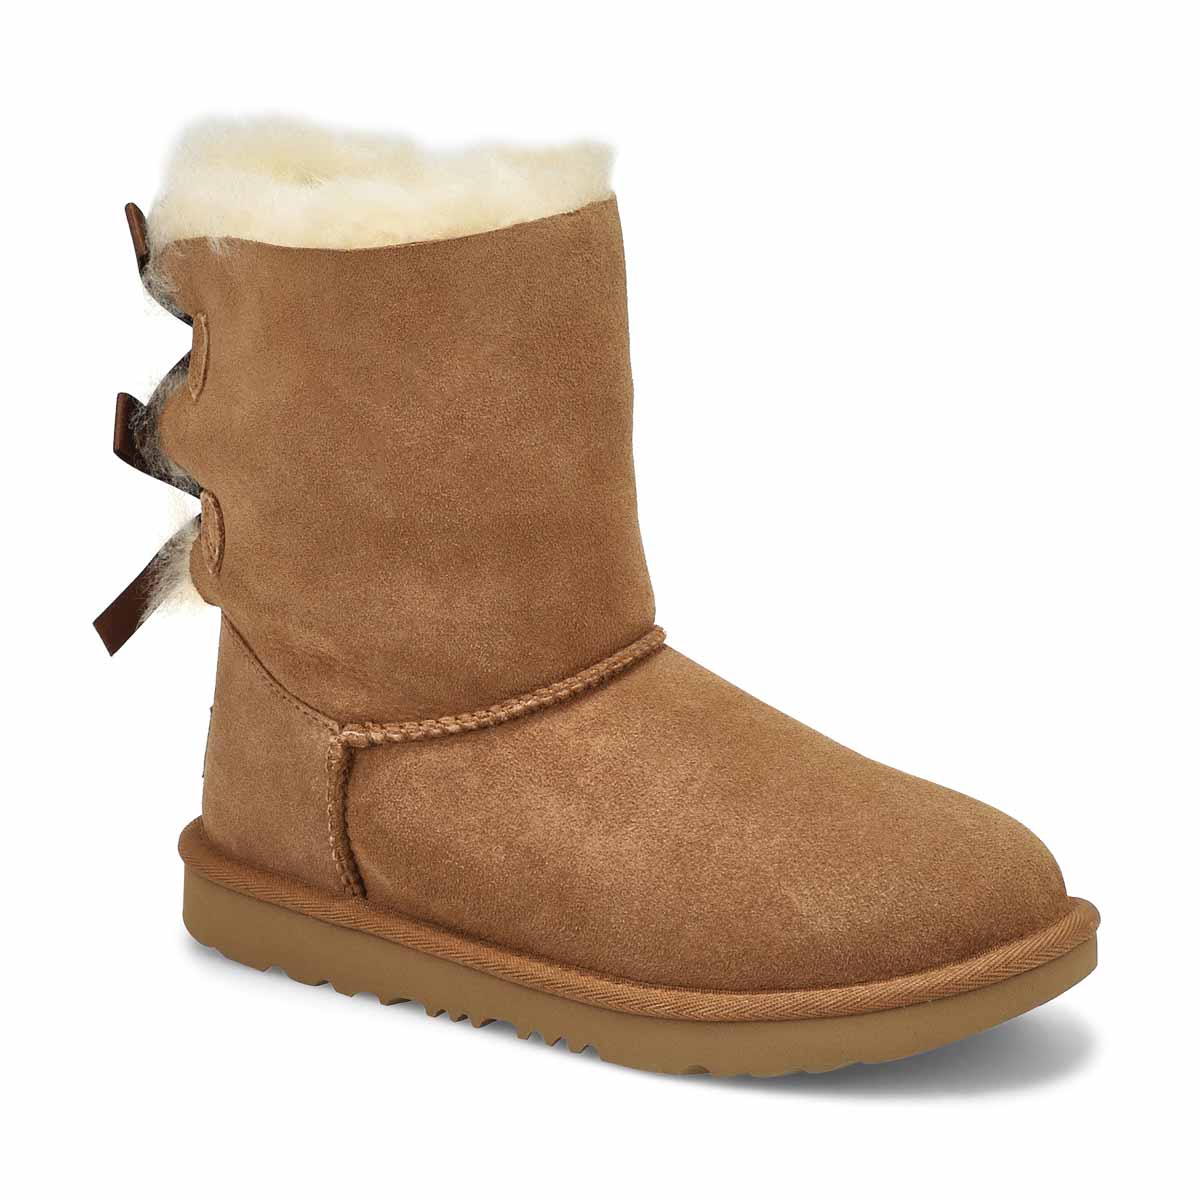 uggs 2 bows